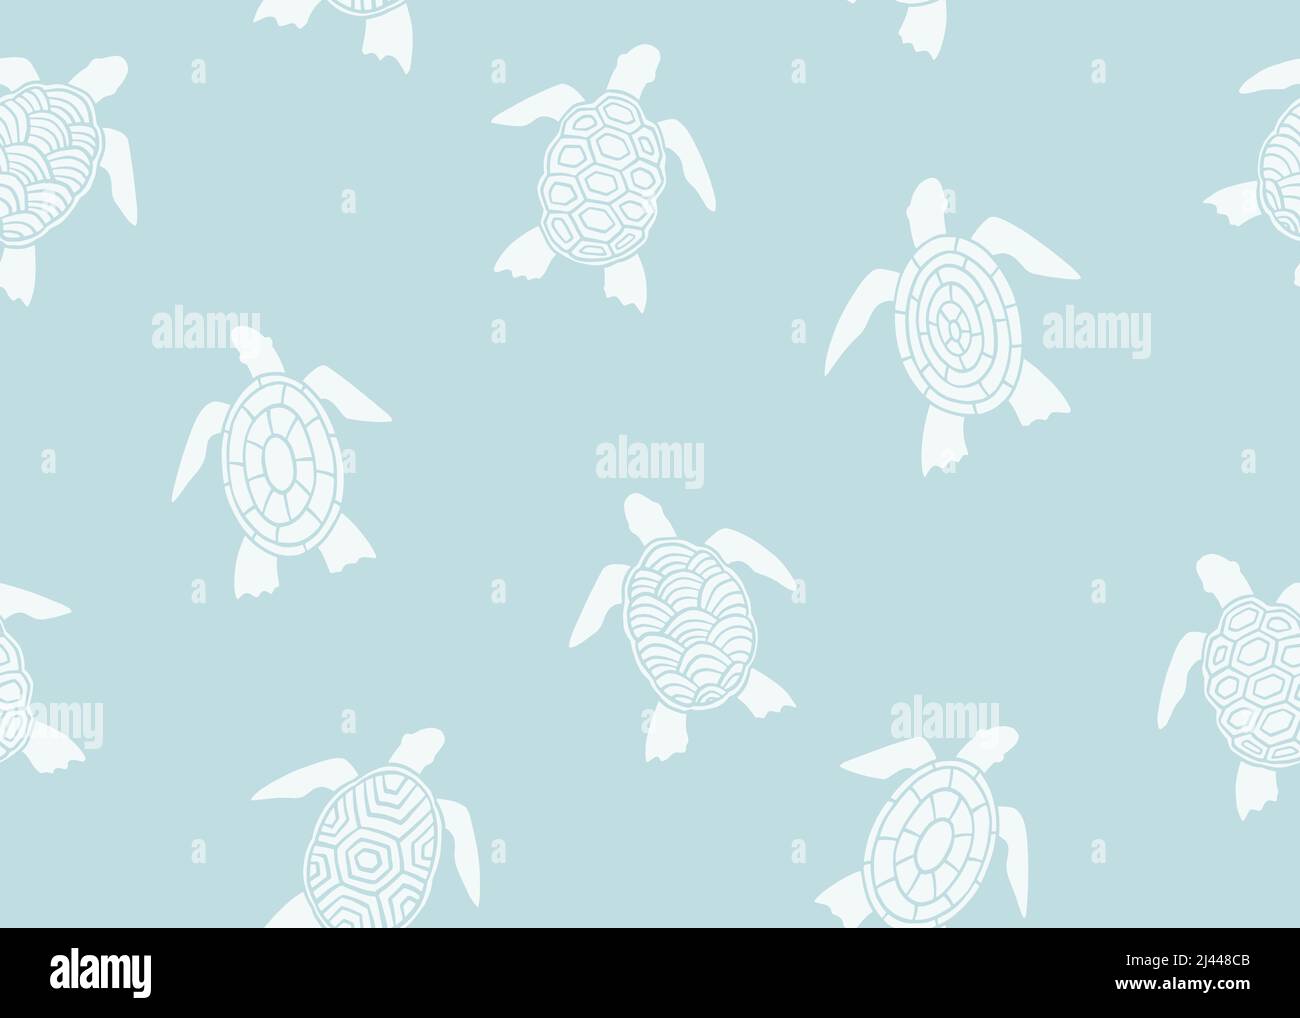 Sea turtle with abstract shell seamless pattern. Vector illustration background. Stock Vector